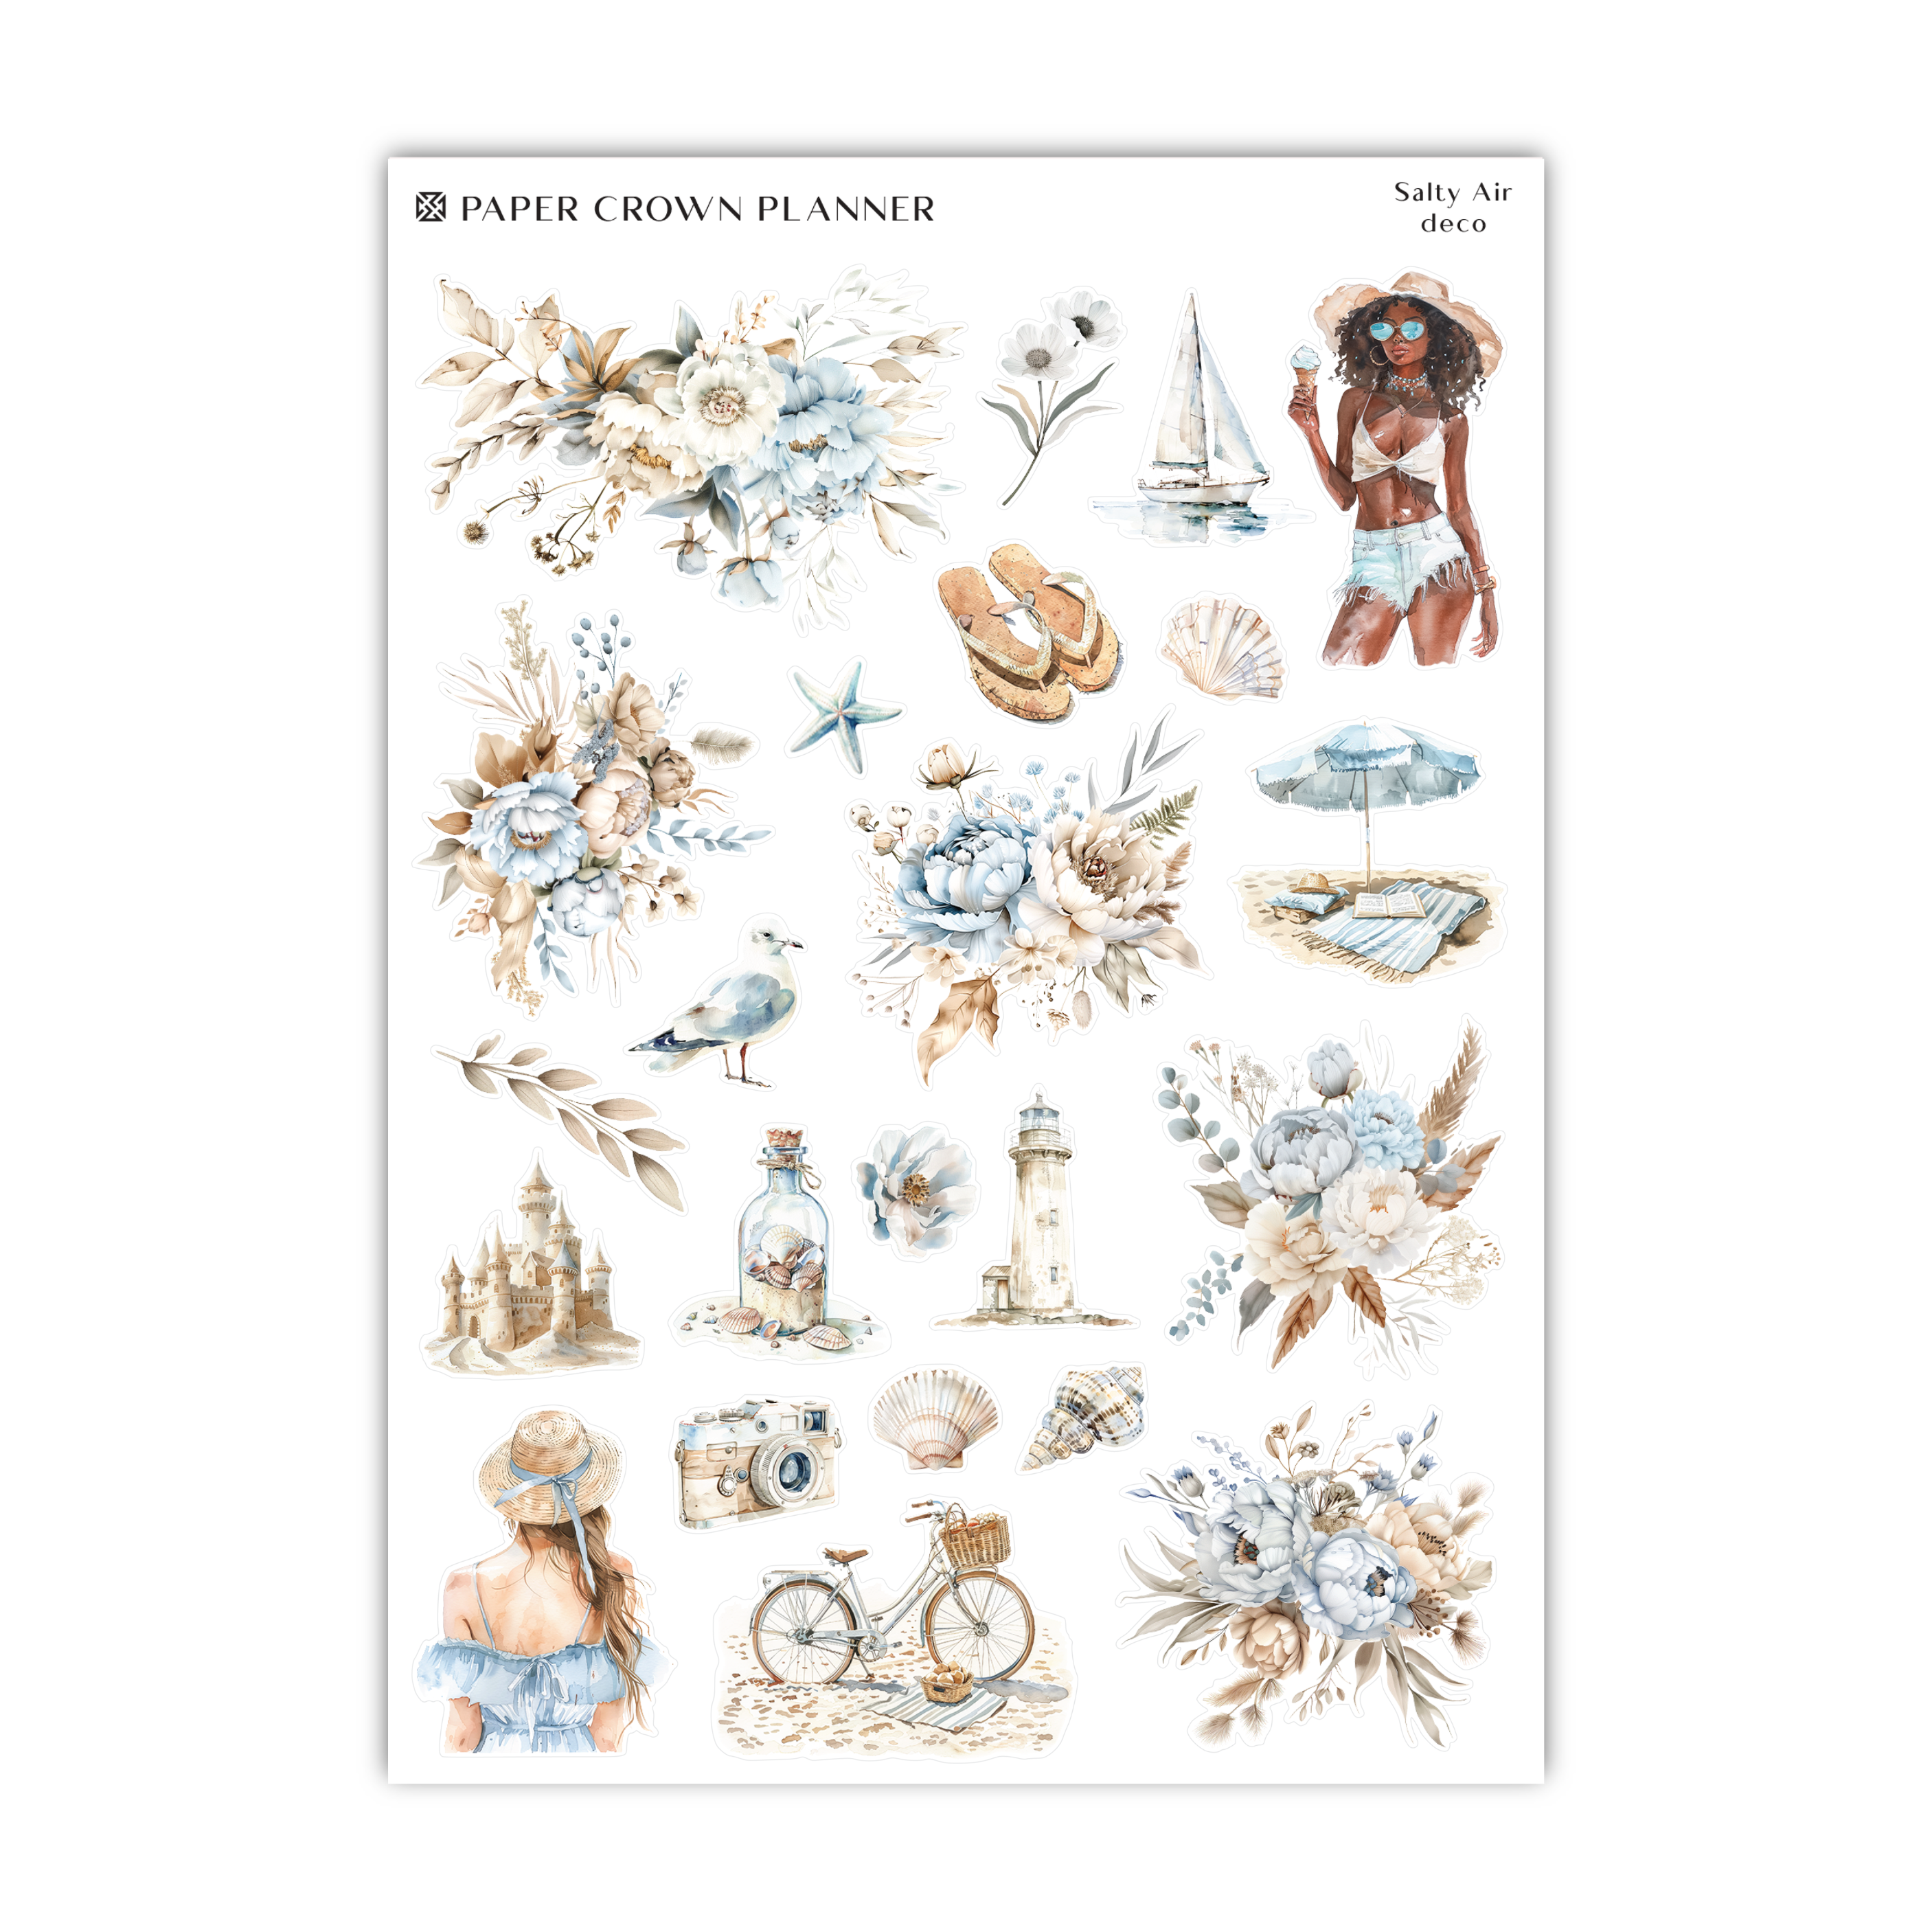 a sheet of stickers with watercolor illustrations